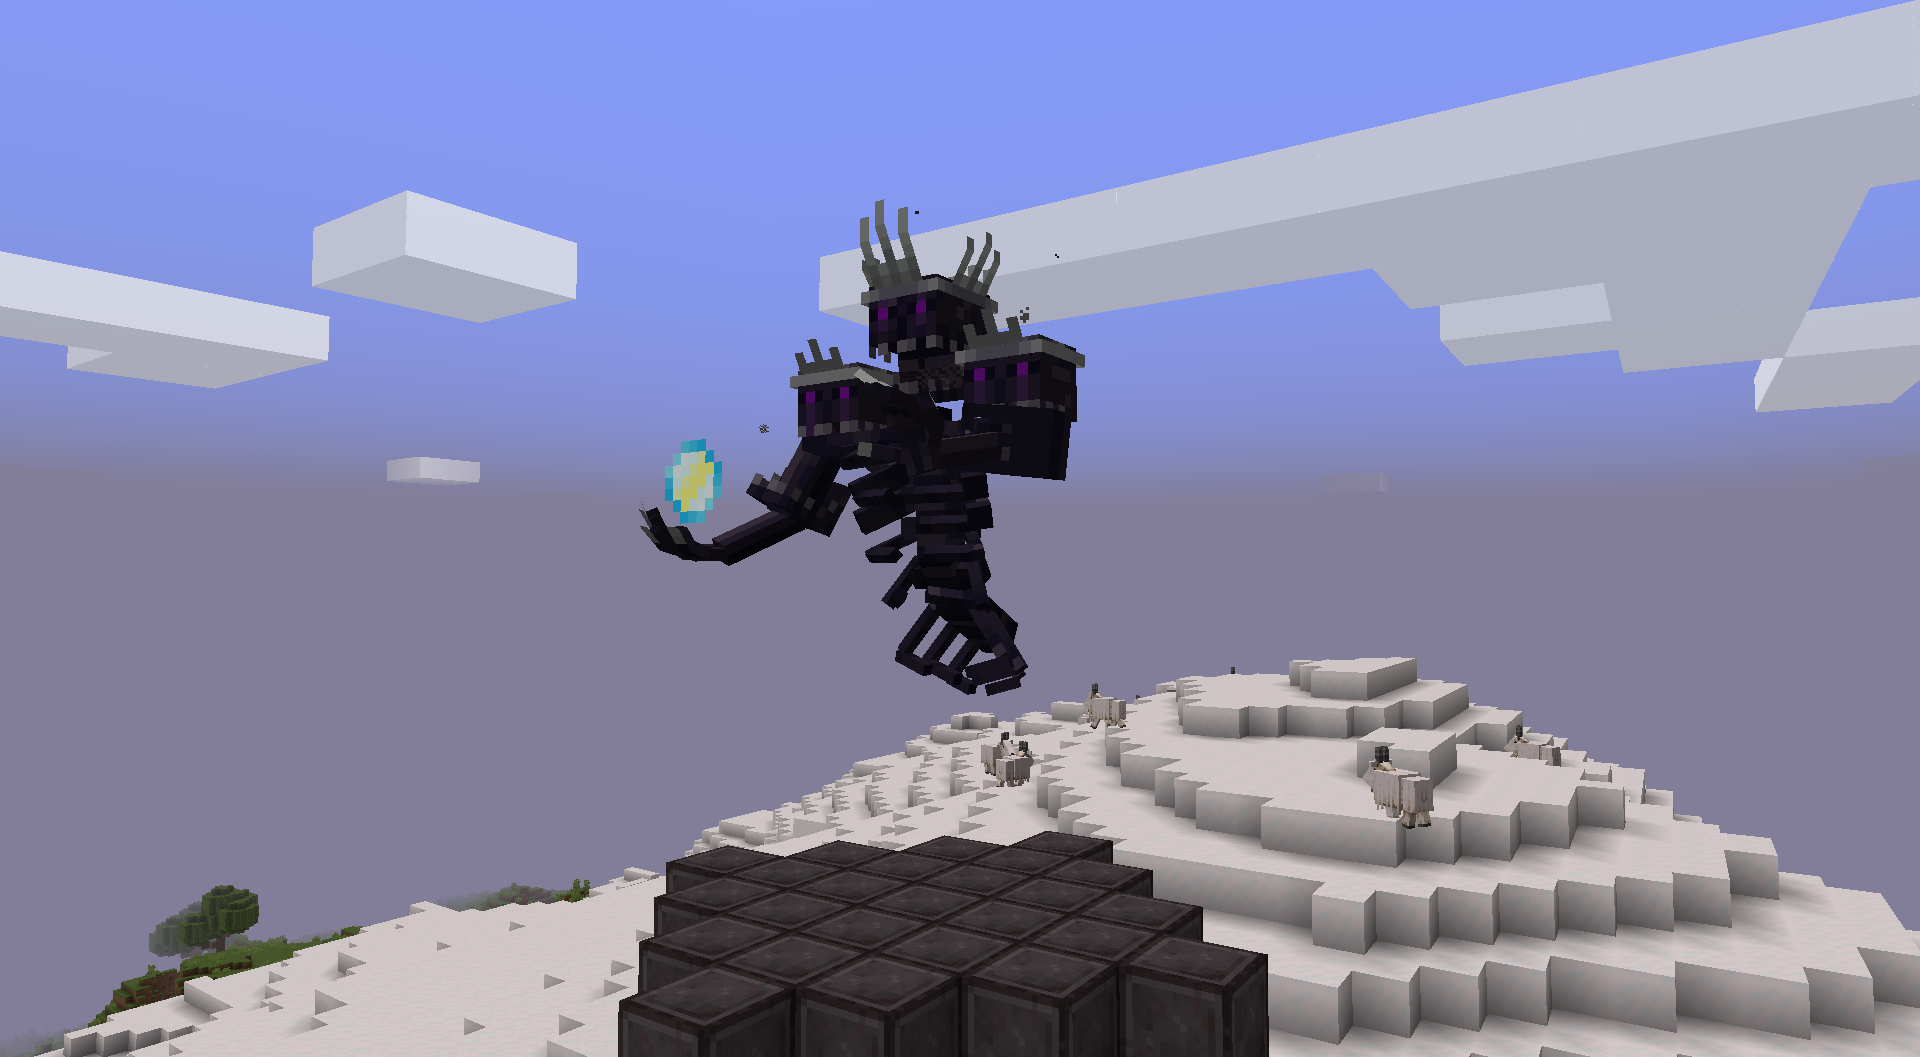 Rebirth of the Night: Wither screenshot 2